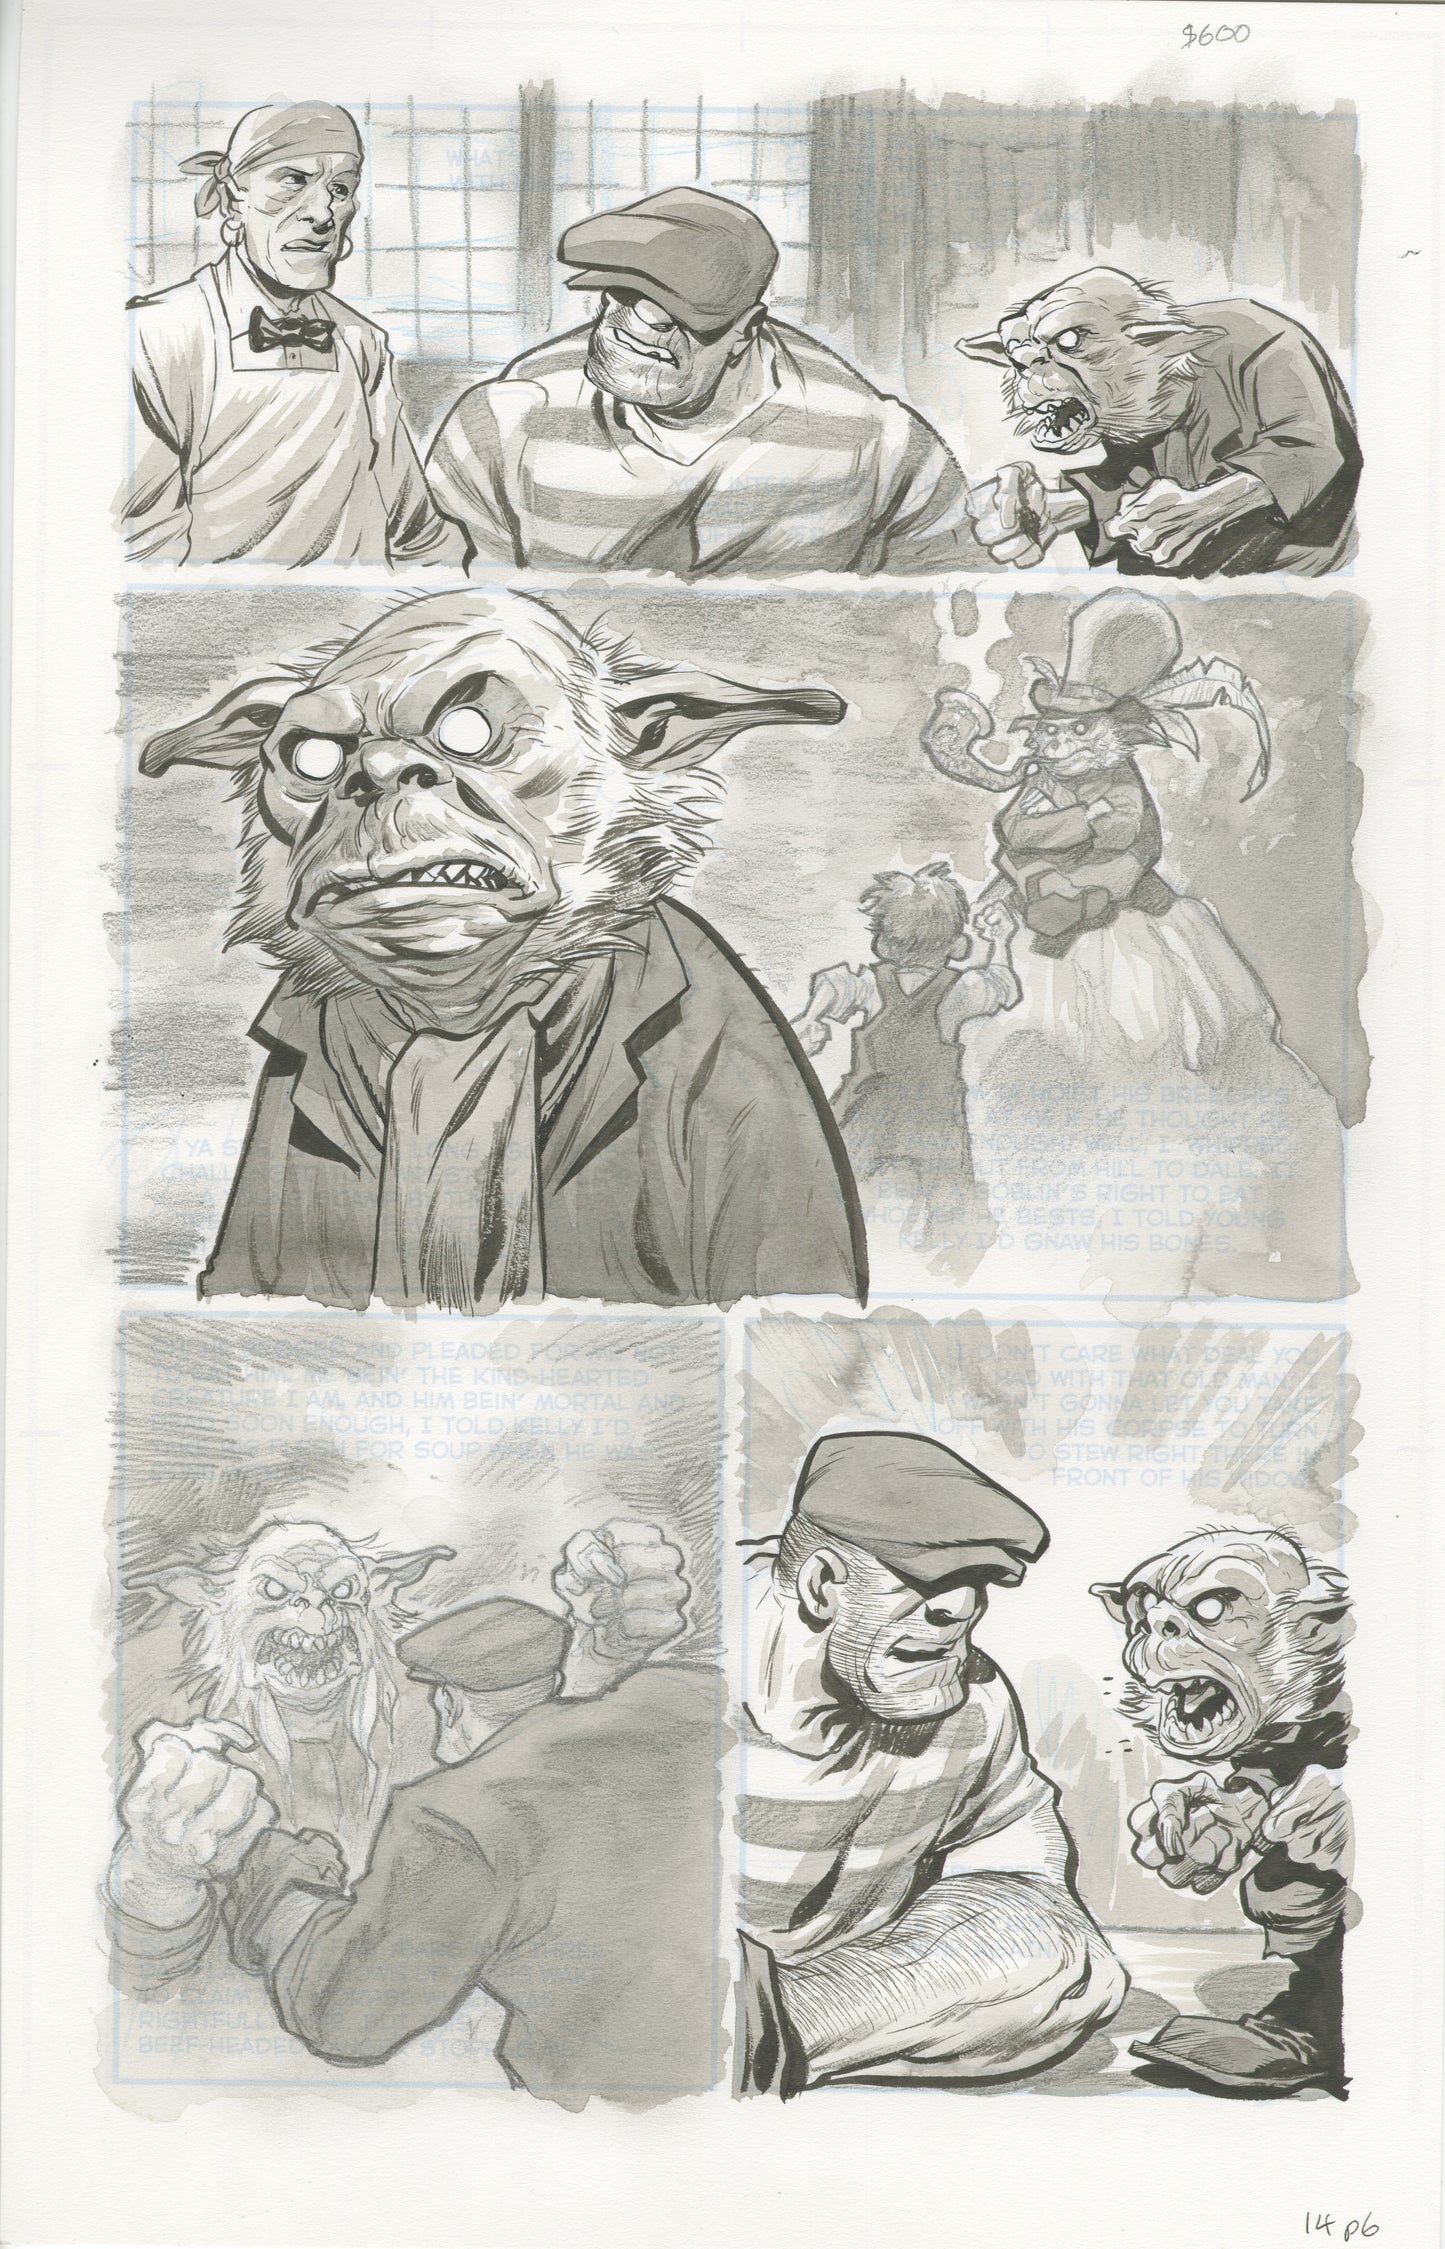 The Goon #14, page #06